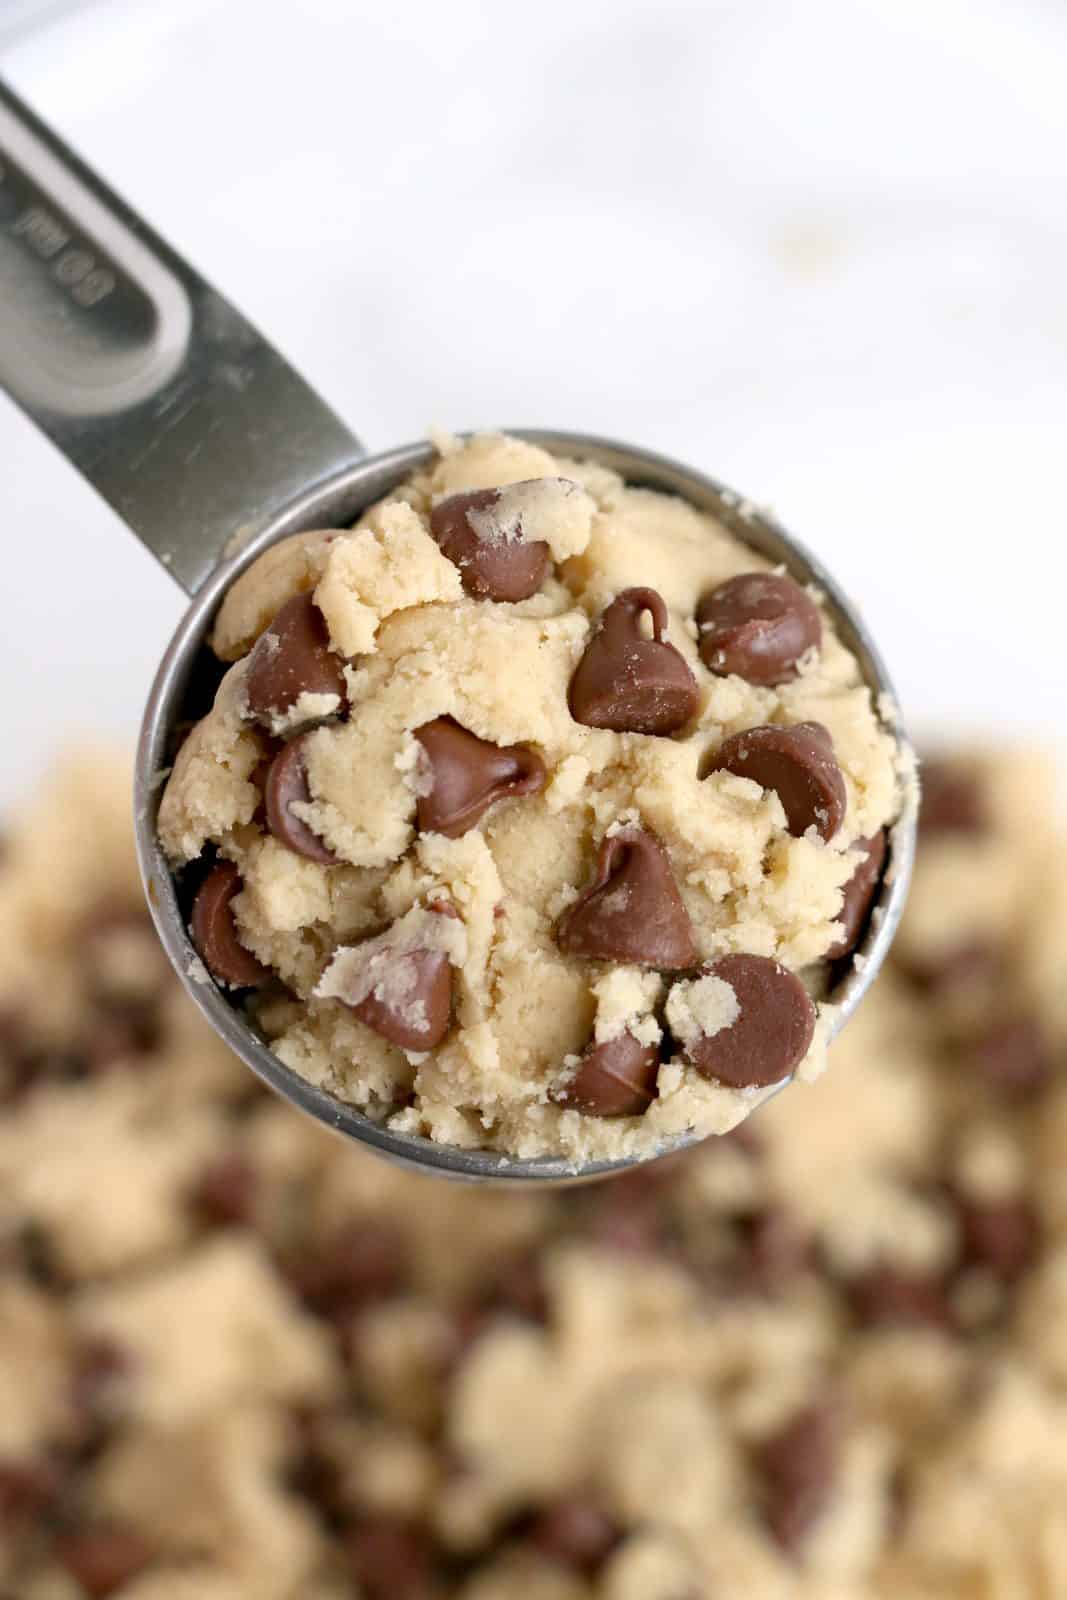 Cookie dough scooped into a 1/4 cup measuring cup.